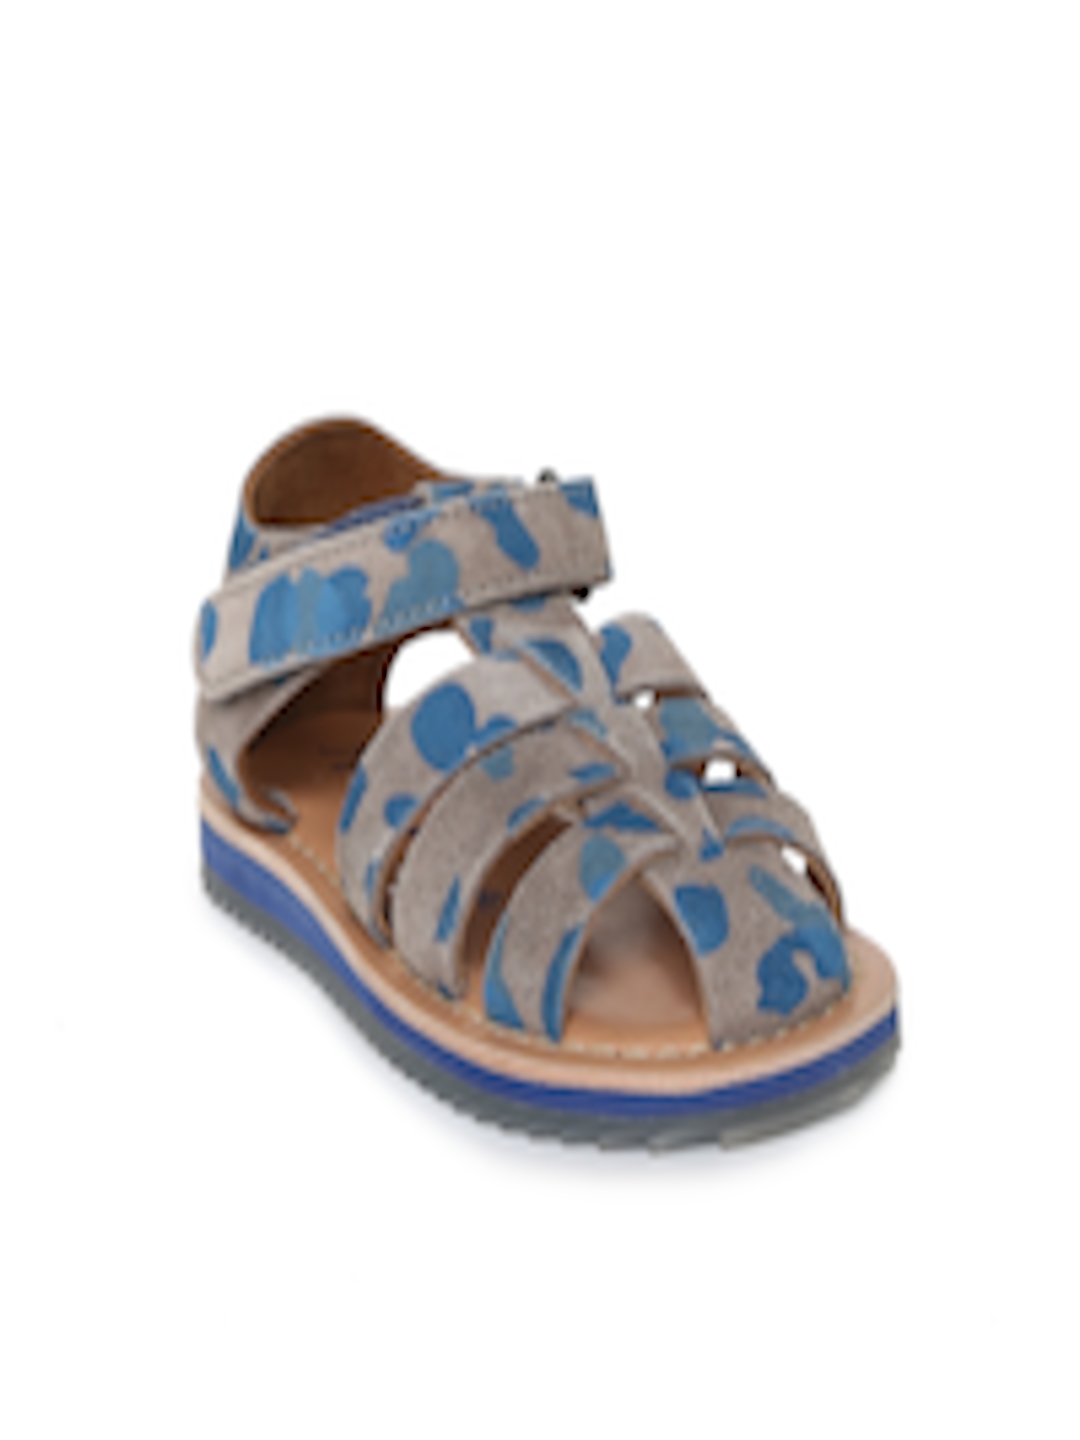 Buy Aria Nica Boys Grey & Blue Army Fisherman Sandals - Sandals for ...